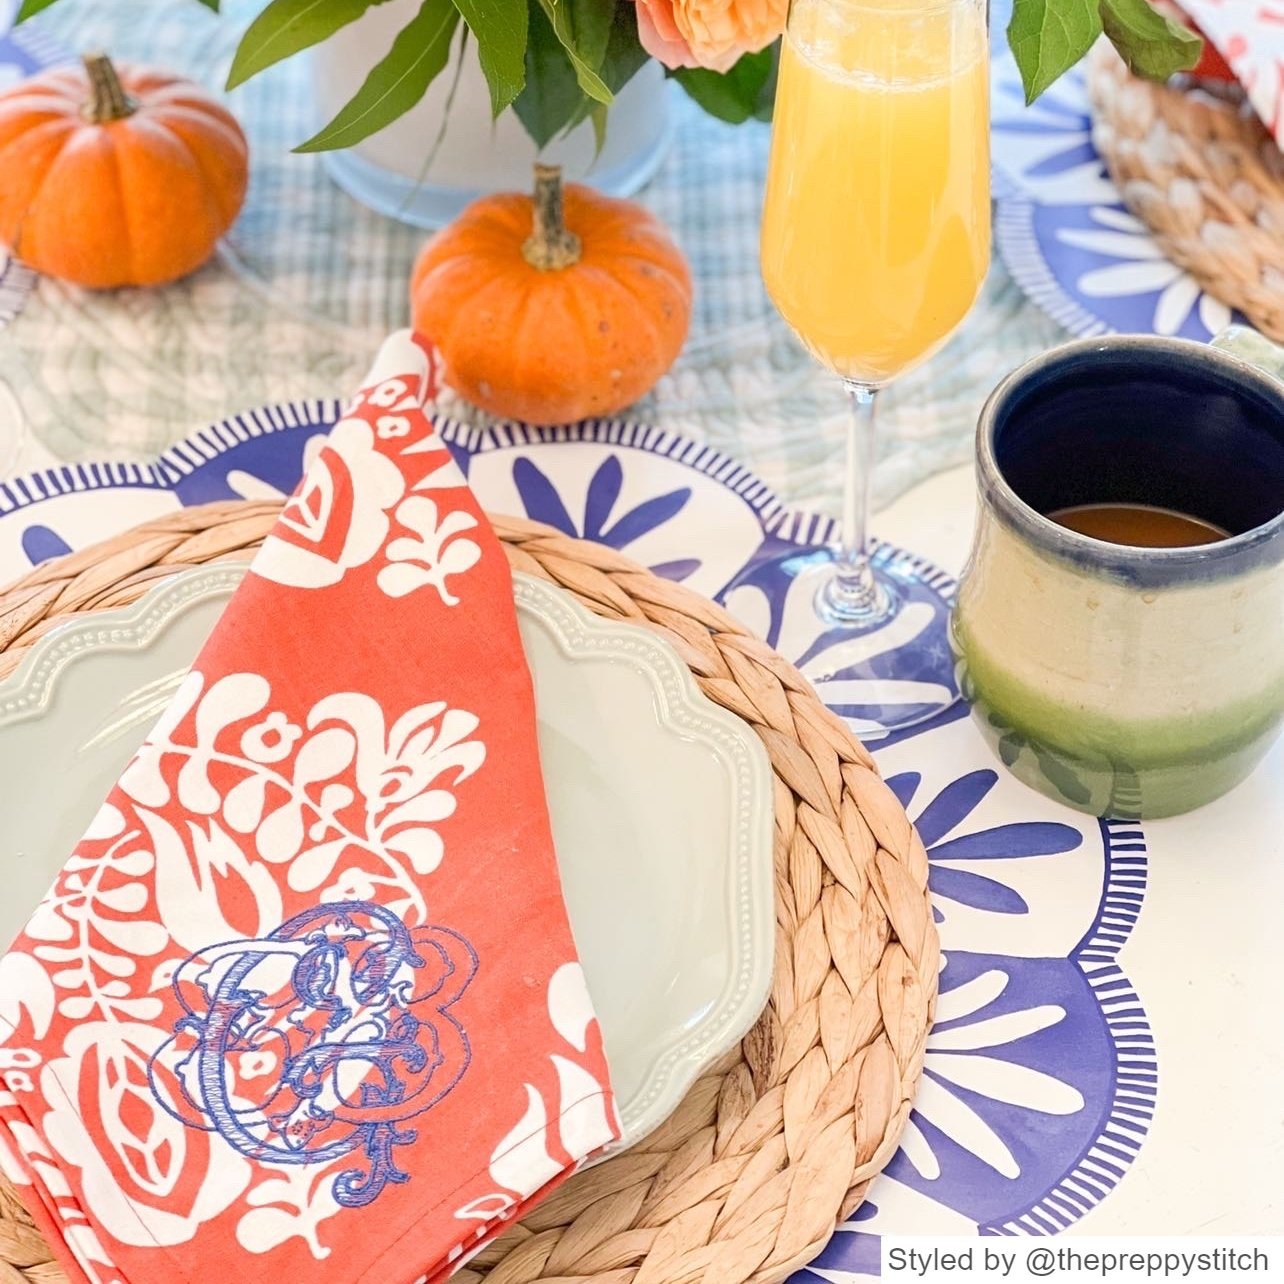 Blue and white scalloped round paper placemat layered with a rattan charger, white plate and orange napkin with mini pumpkins and a mimosa